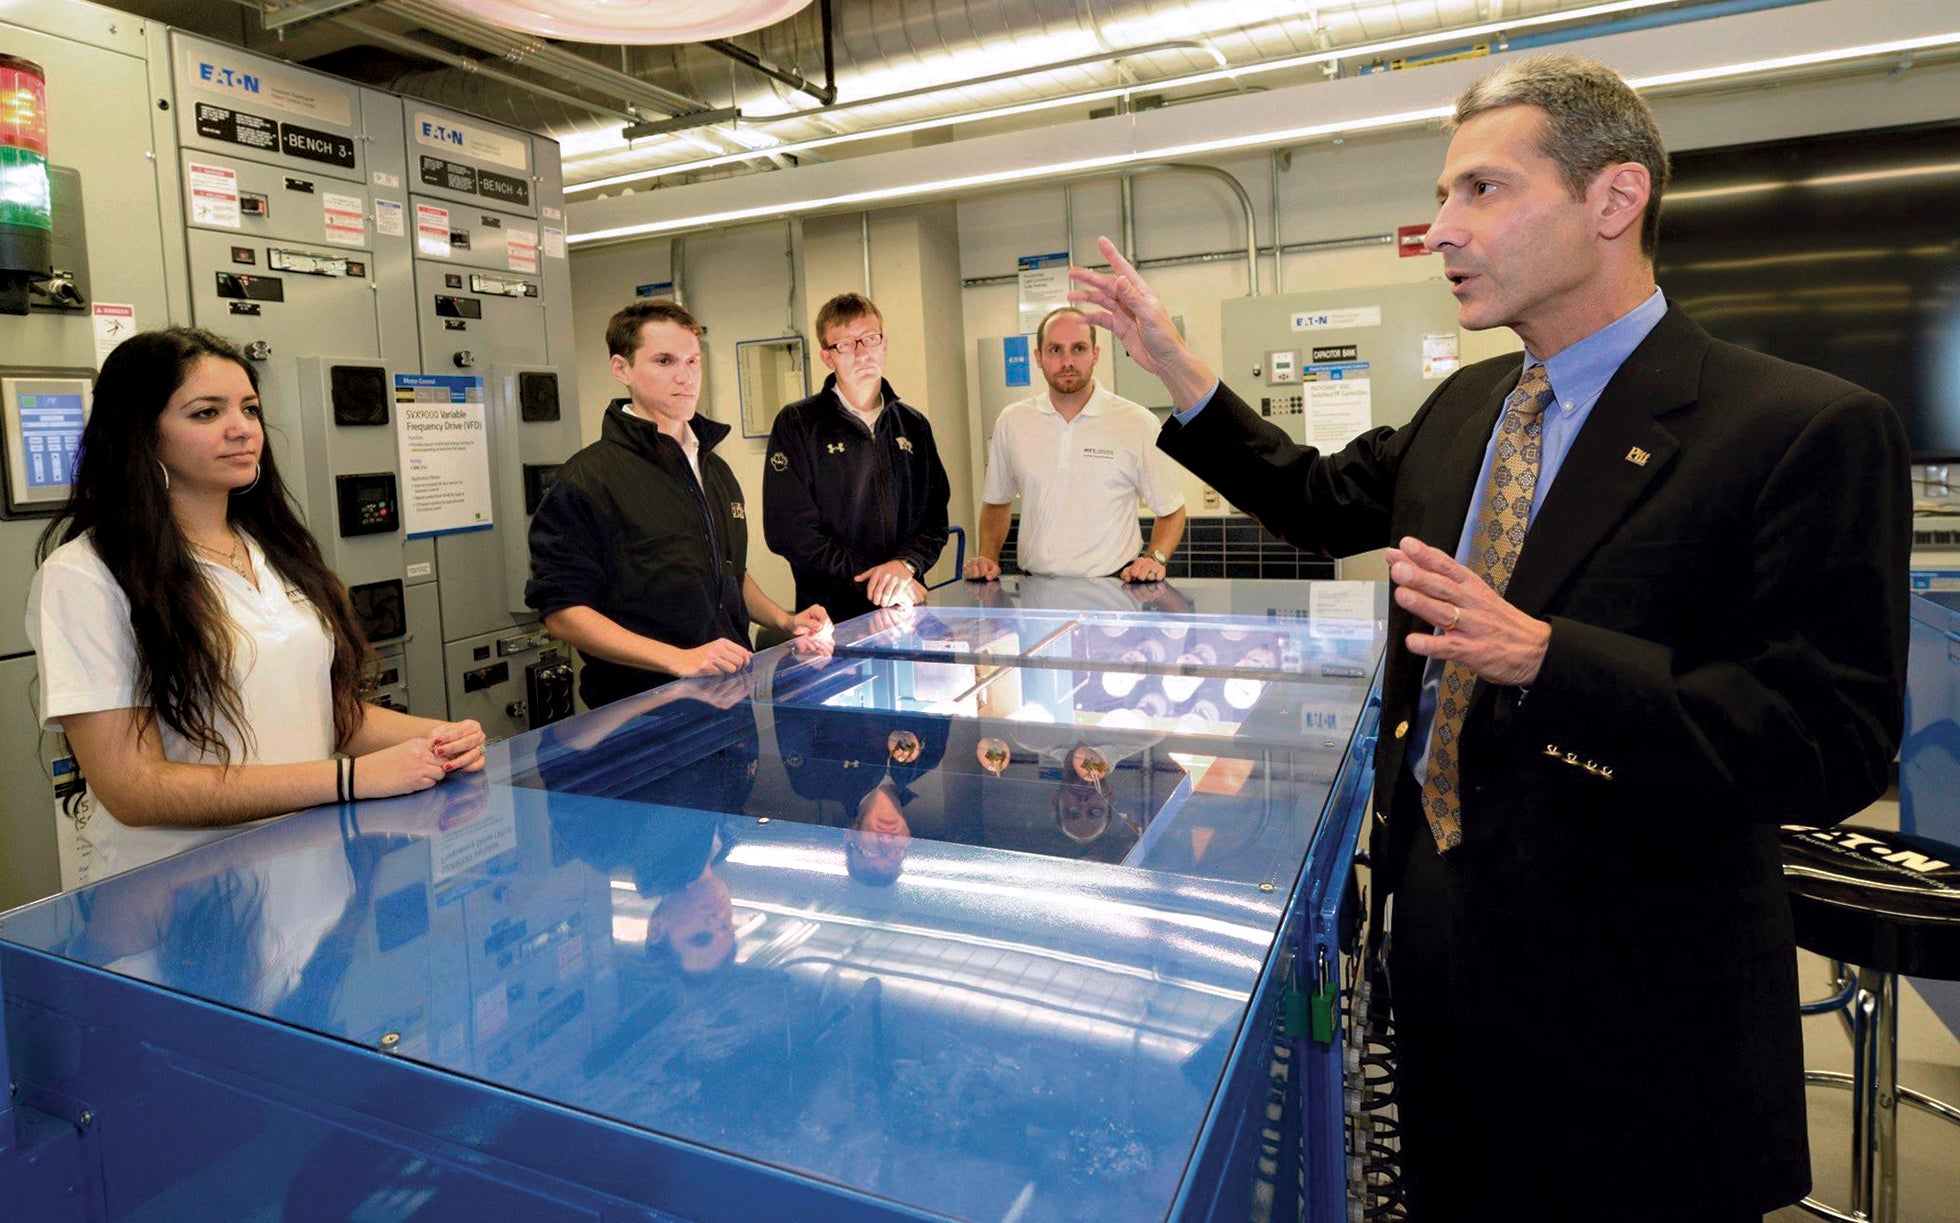 Gregory Reed talks with students in a lab setting.